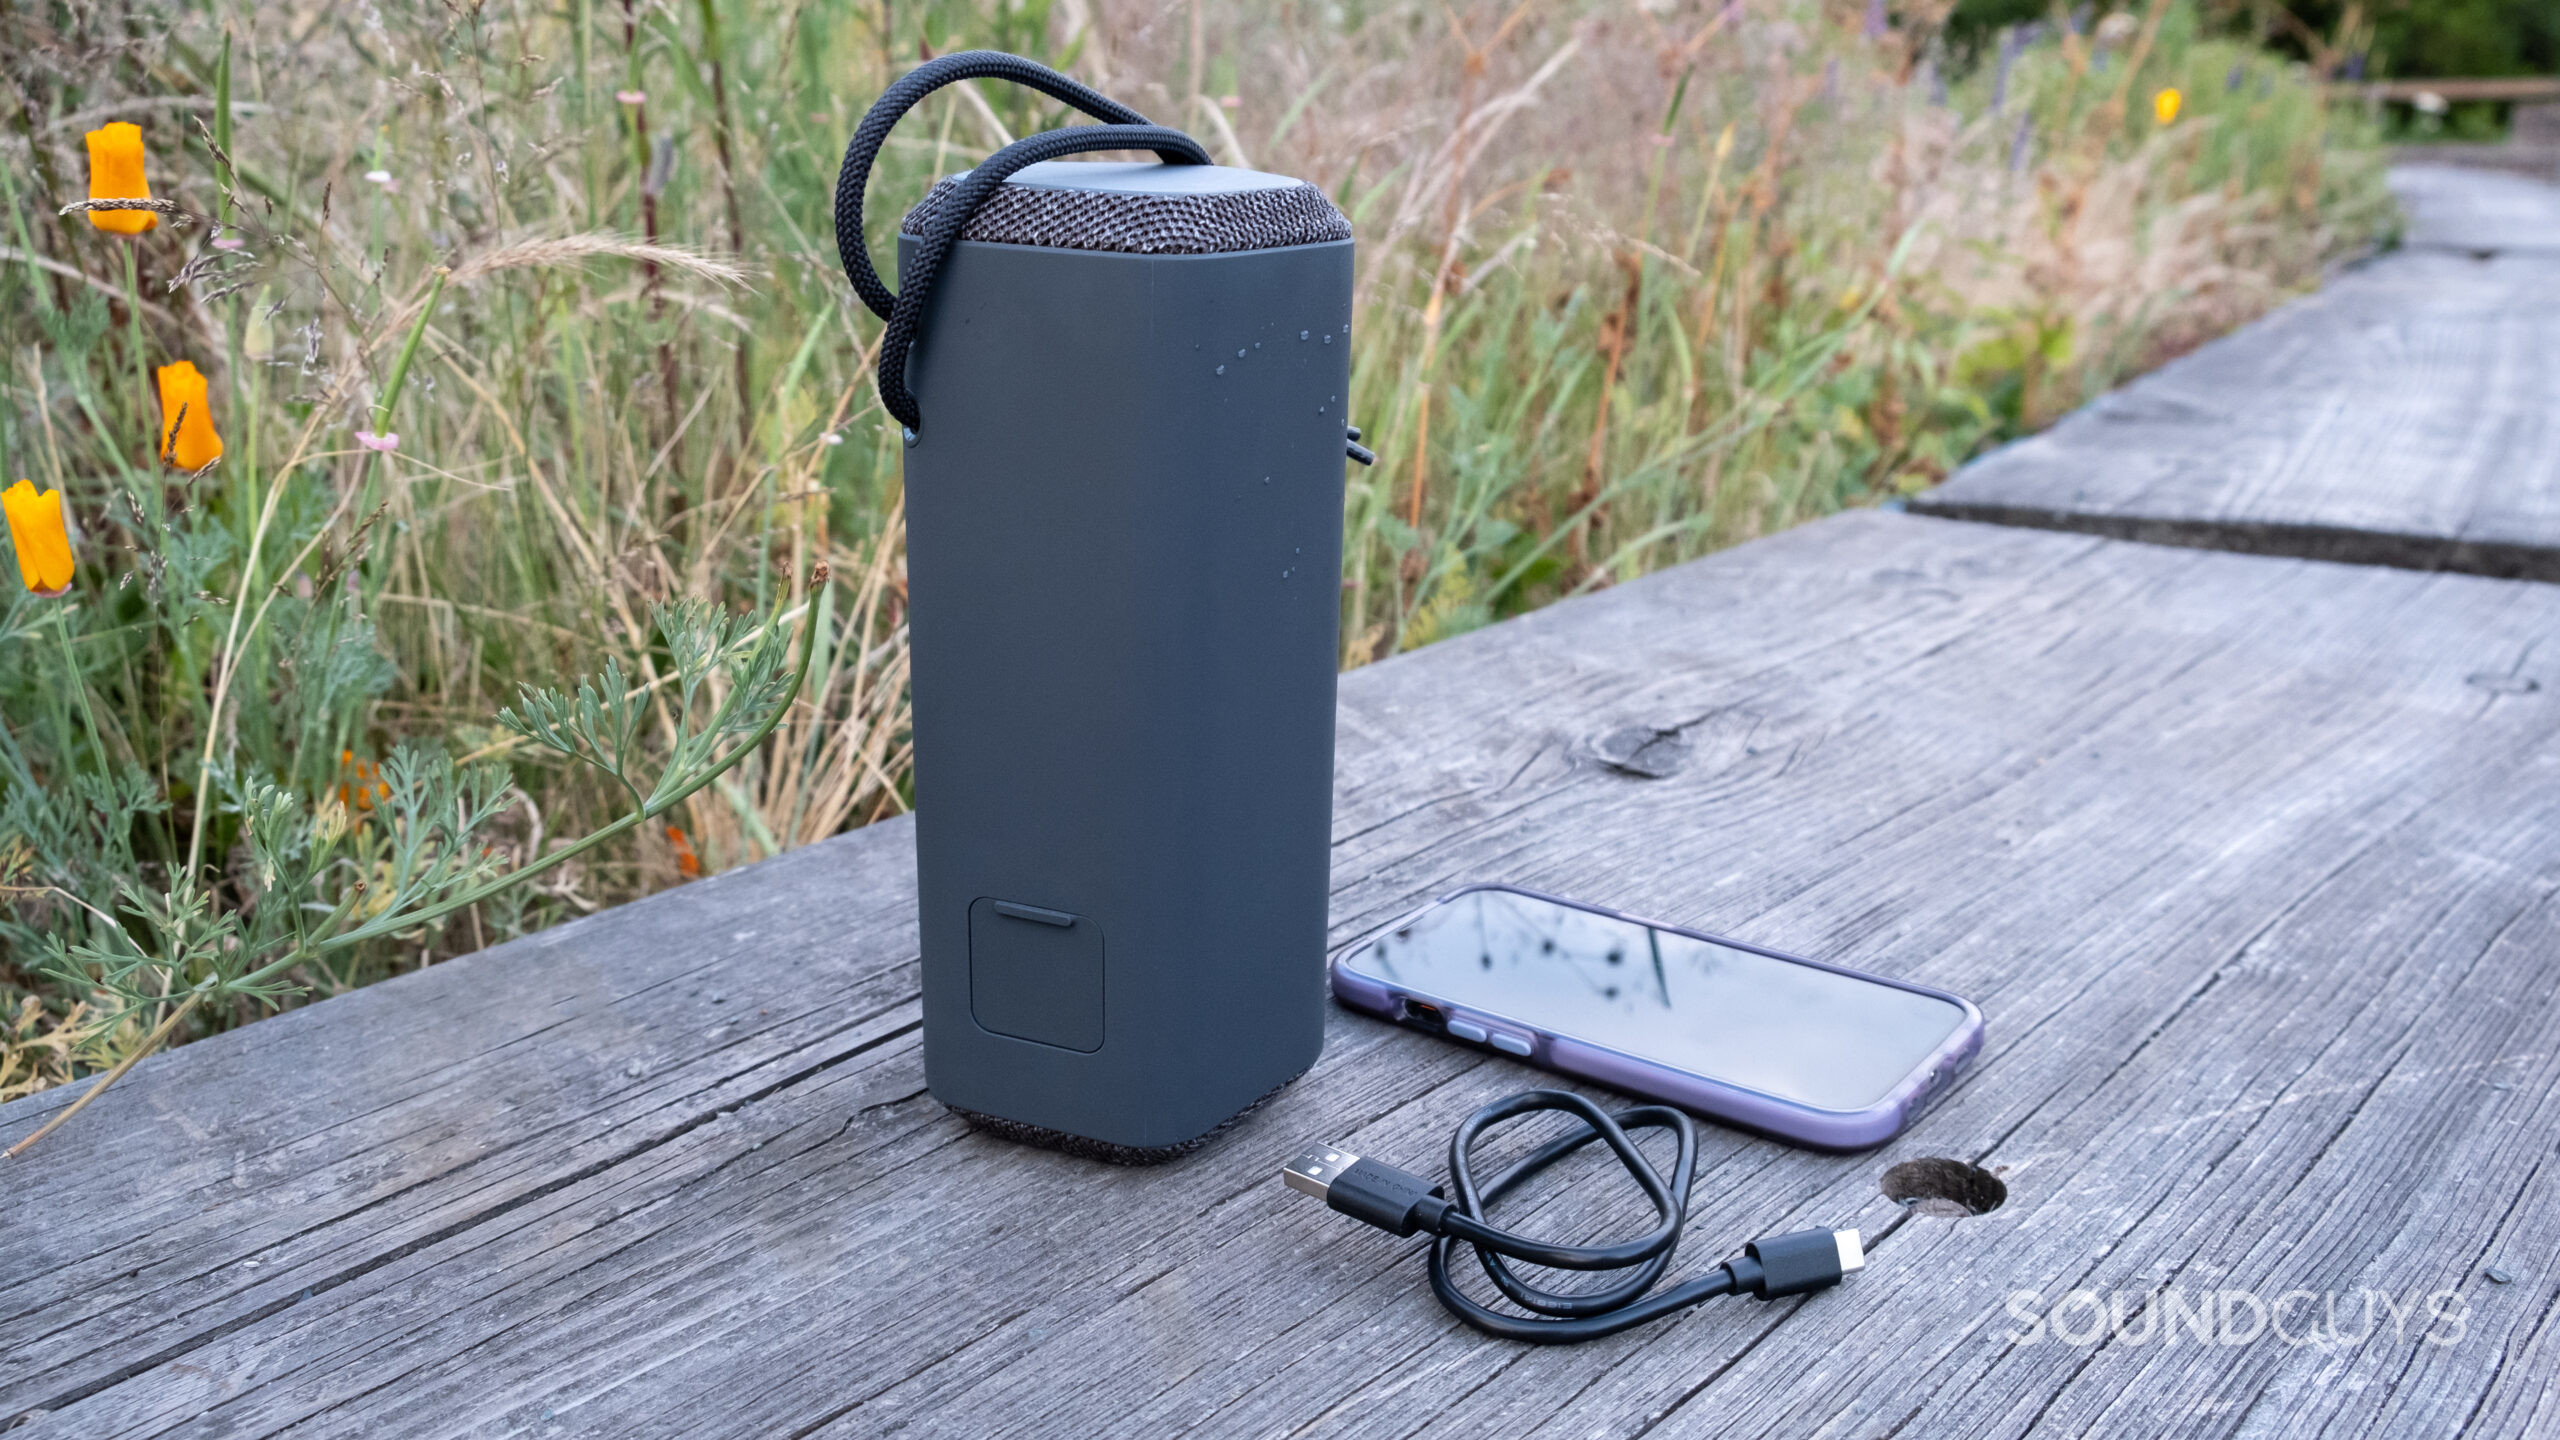 The Sony SRS-XE200 with its cable next to an iPhone on a wood surface.